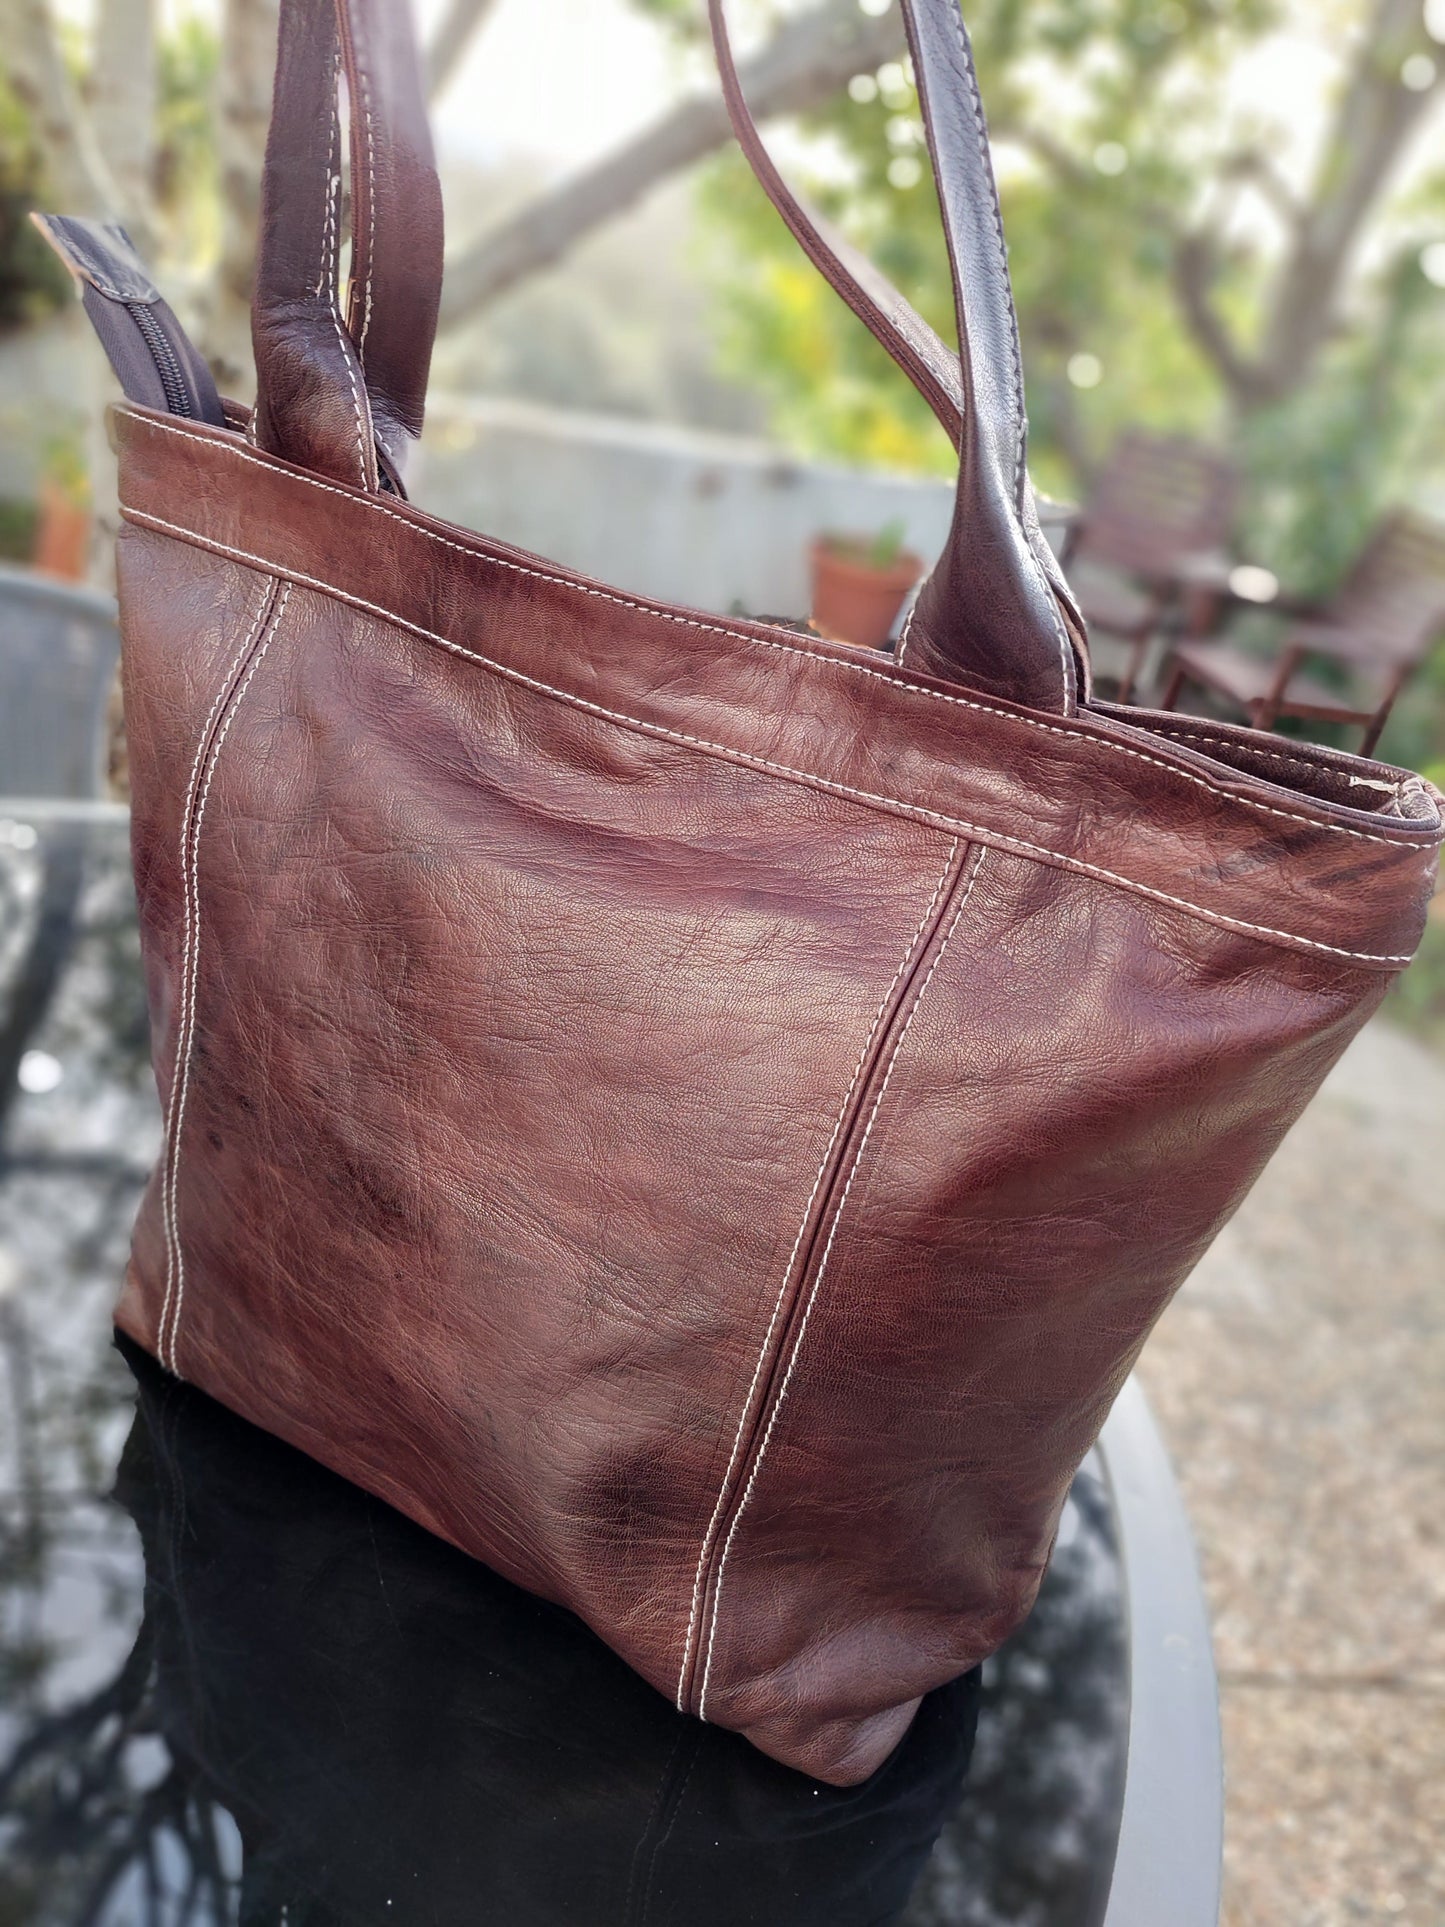 Brown backside of traditional Moroccan Camel leather Tote bag | Leatherncharm